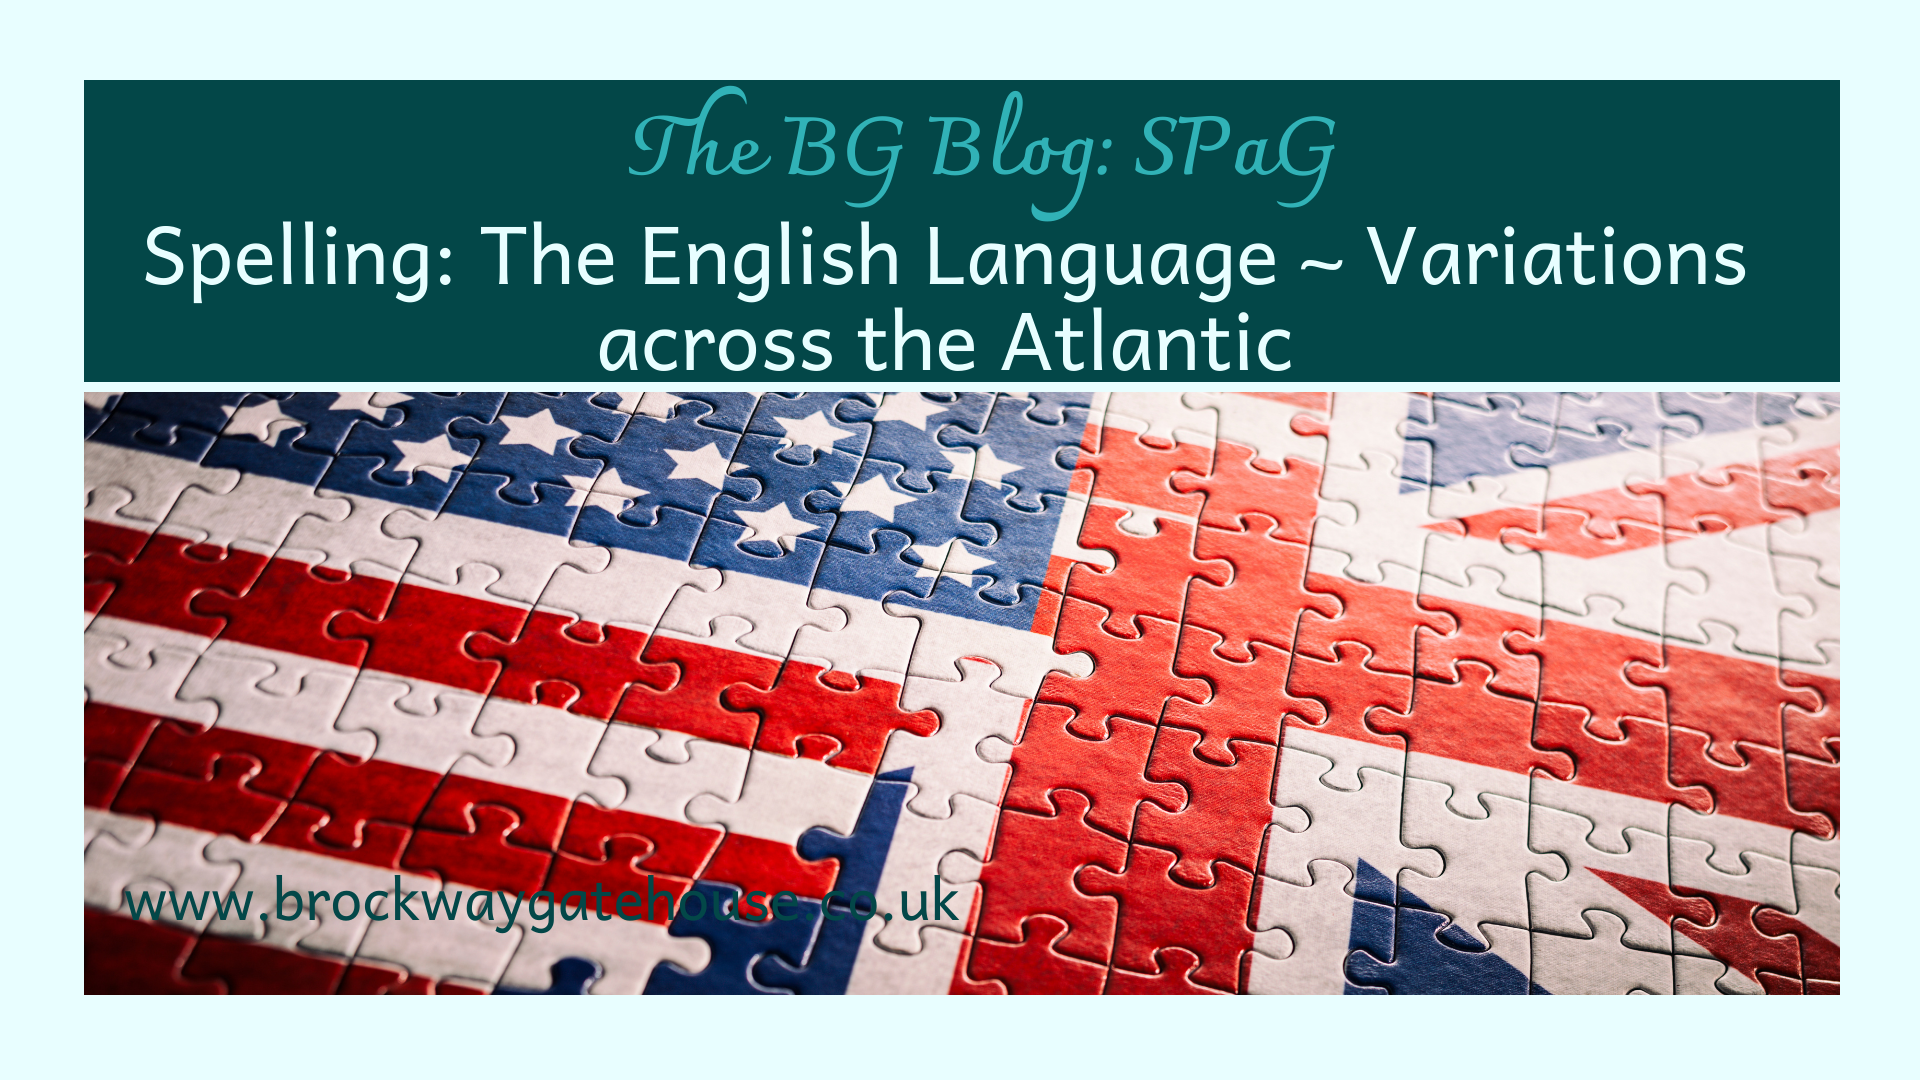 post Featured Image 1920x1080pm - SPaG: Spelling. The English Language ~ Variations across the Atlantic